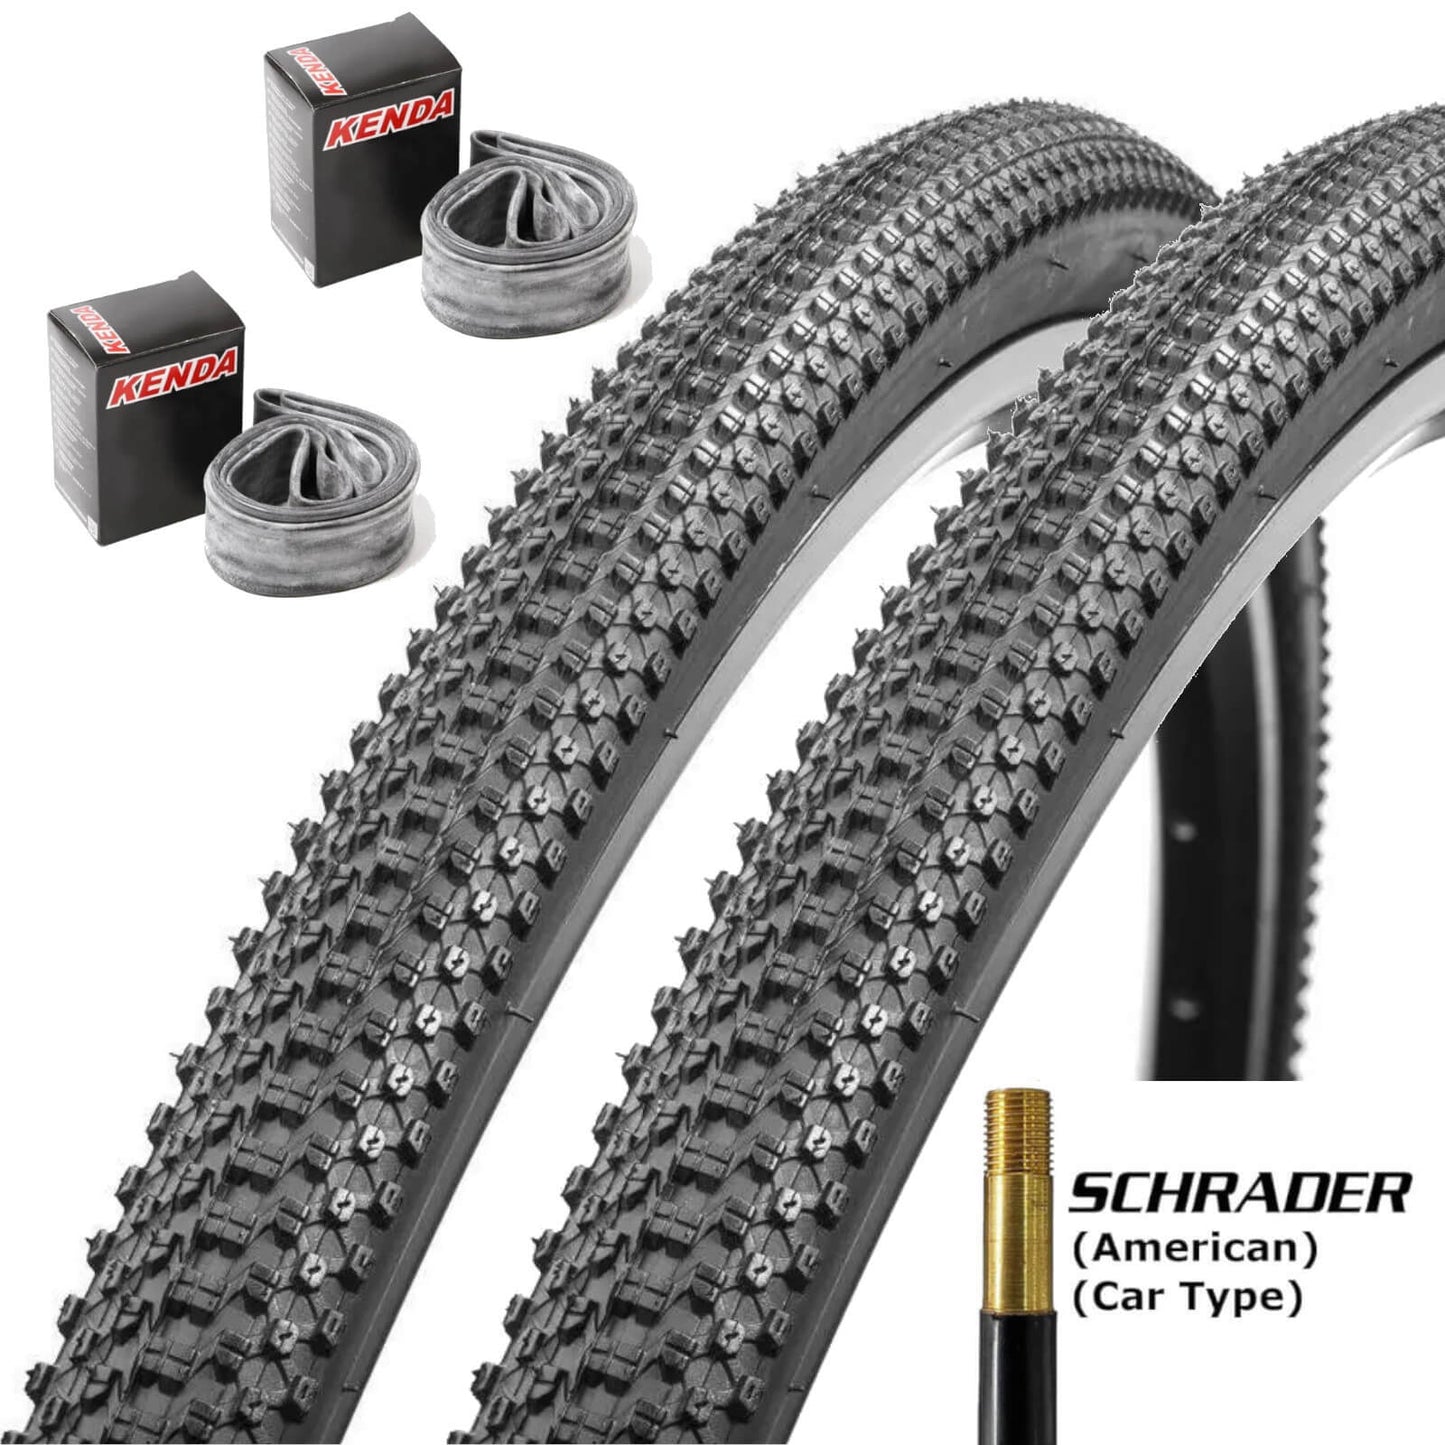 Kenda K1047 Small Block 8 29x2.1" 29 Inch Bike Tyre Pair of Tyres With Schrader Tubes